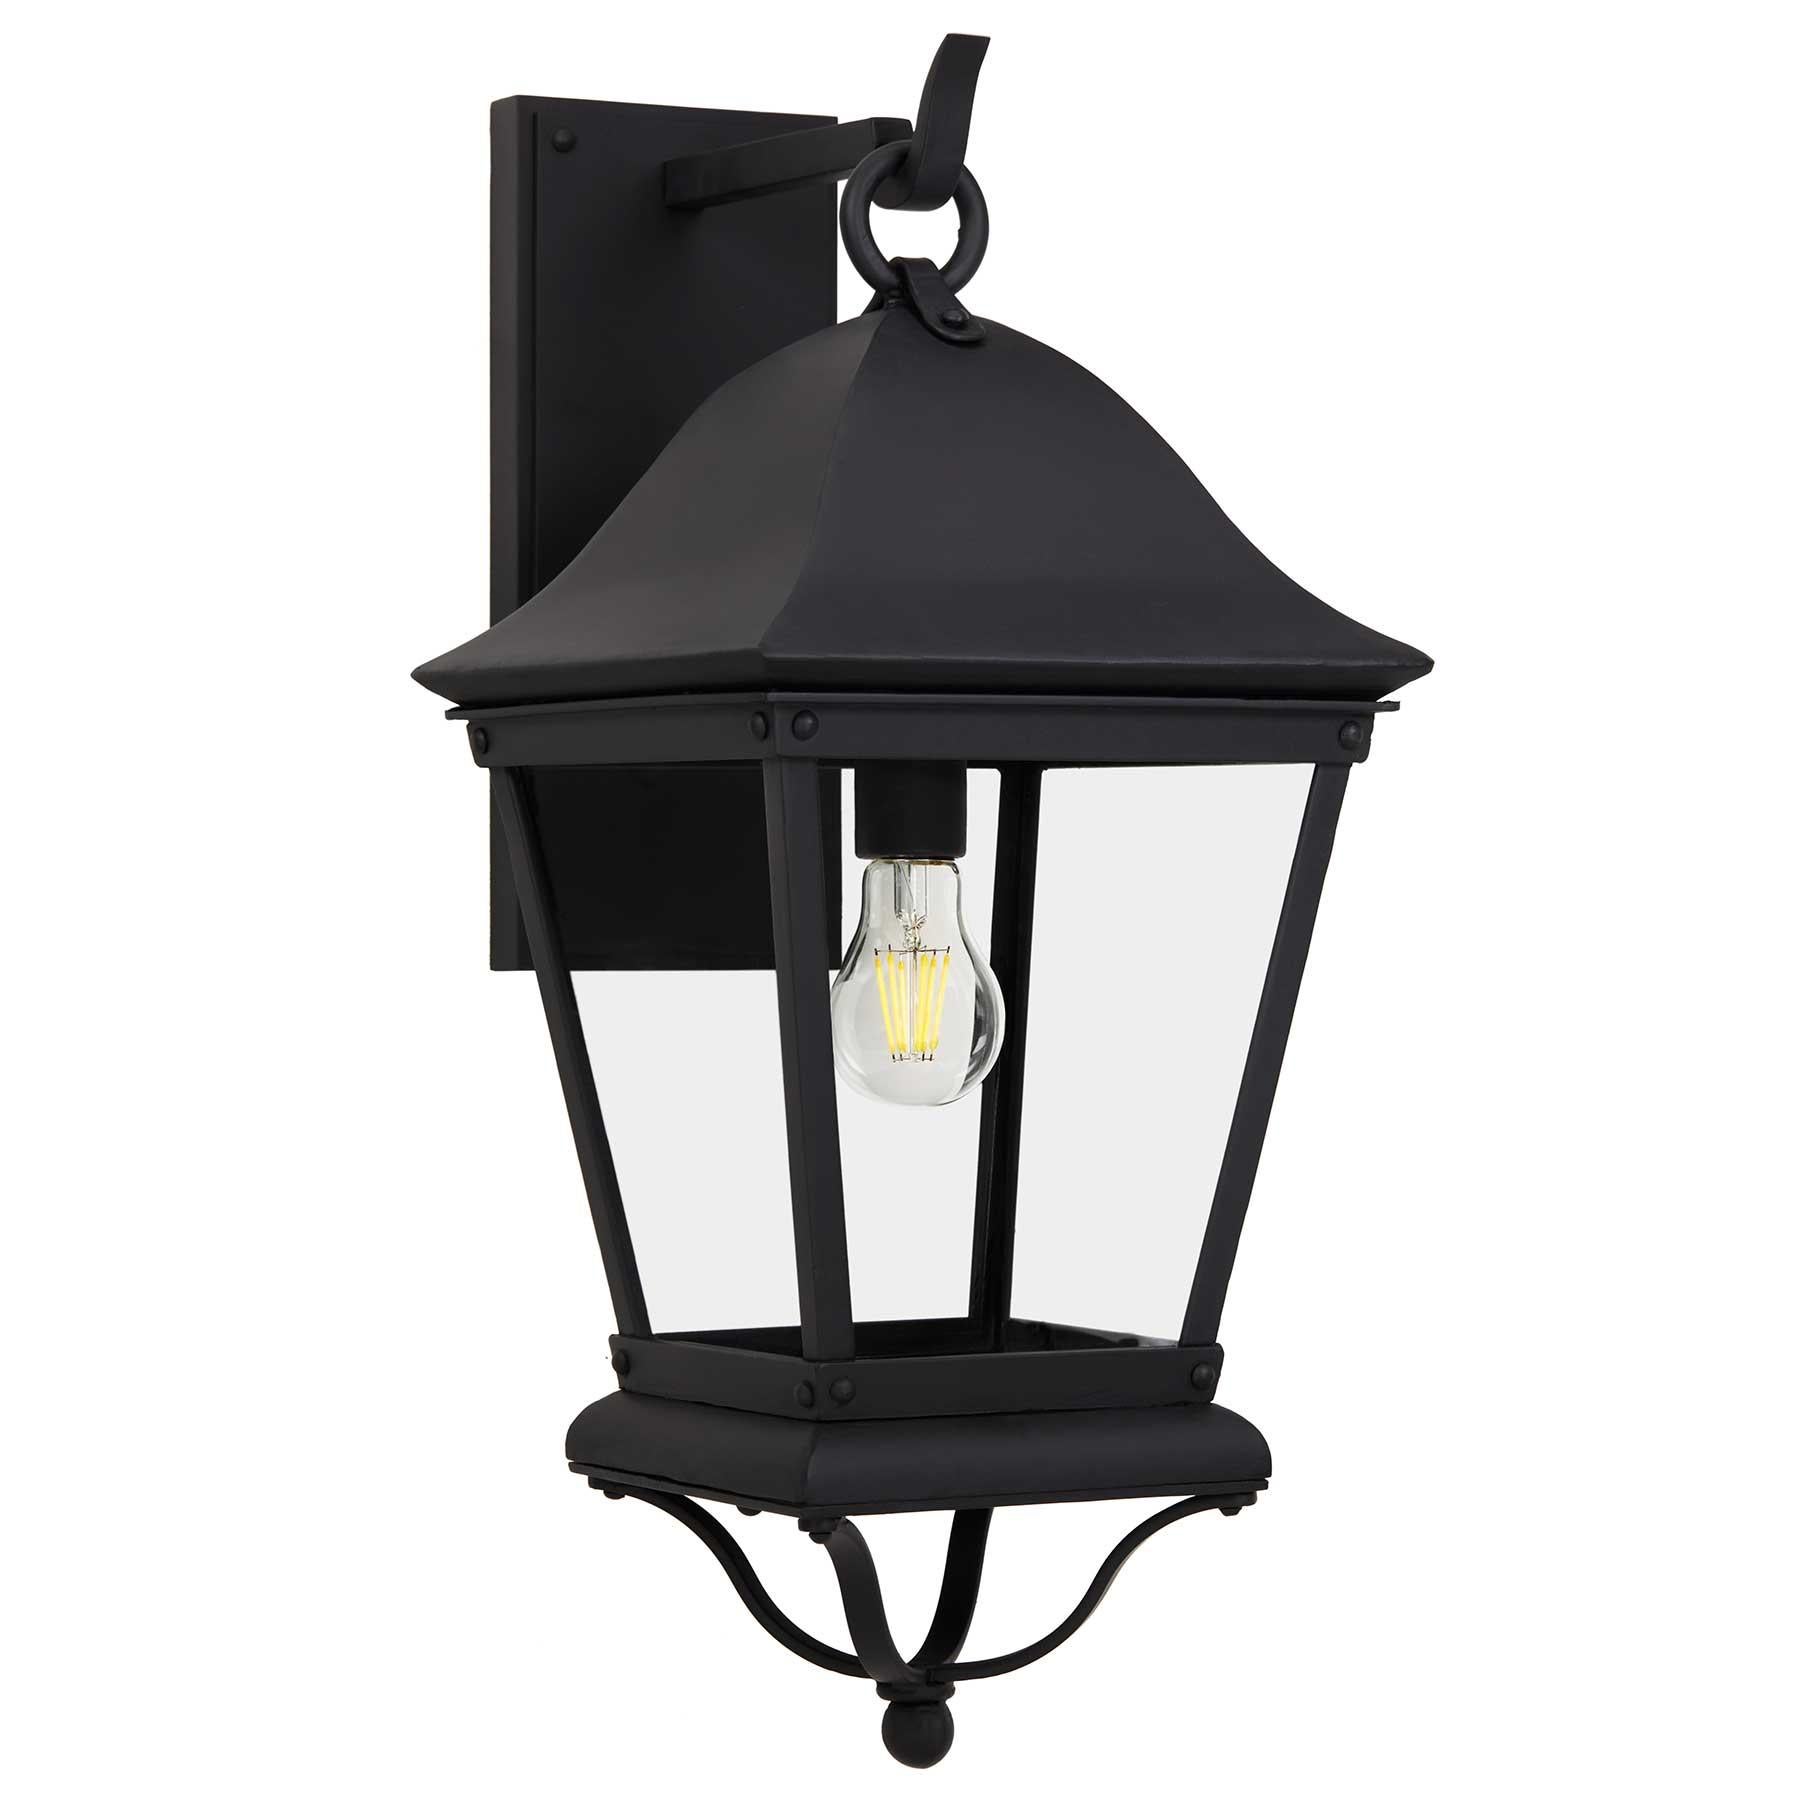 This classic lantern features a tapered profile, bell-curved lid, and an elemental aesthetic. Open glass panels and rivet detailing lend a modern twist to a classic lantern style. Suitable for an array of settings.

Backplate Dimensions (inches): 5W